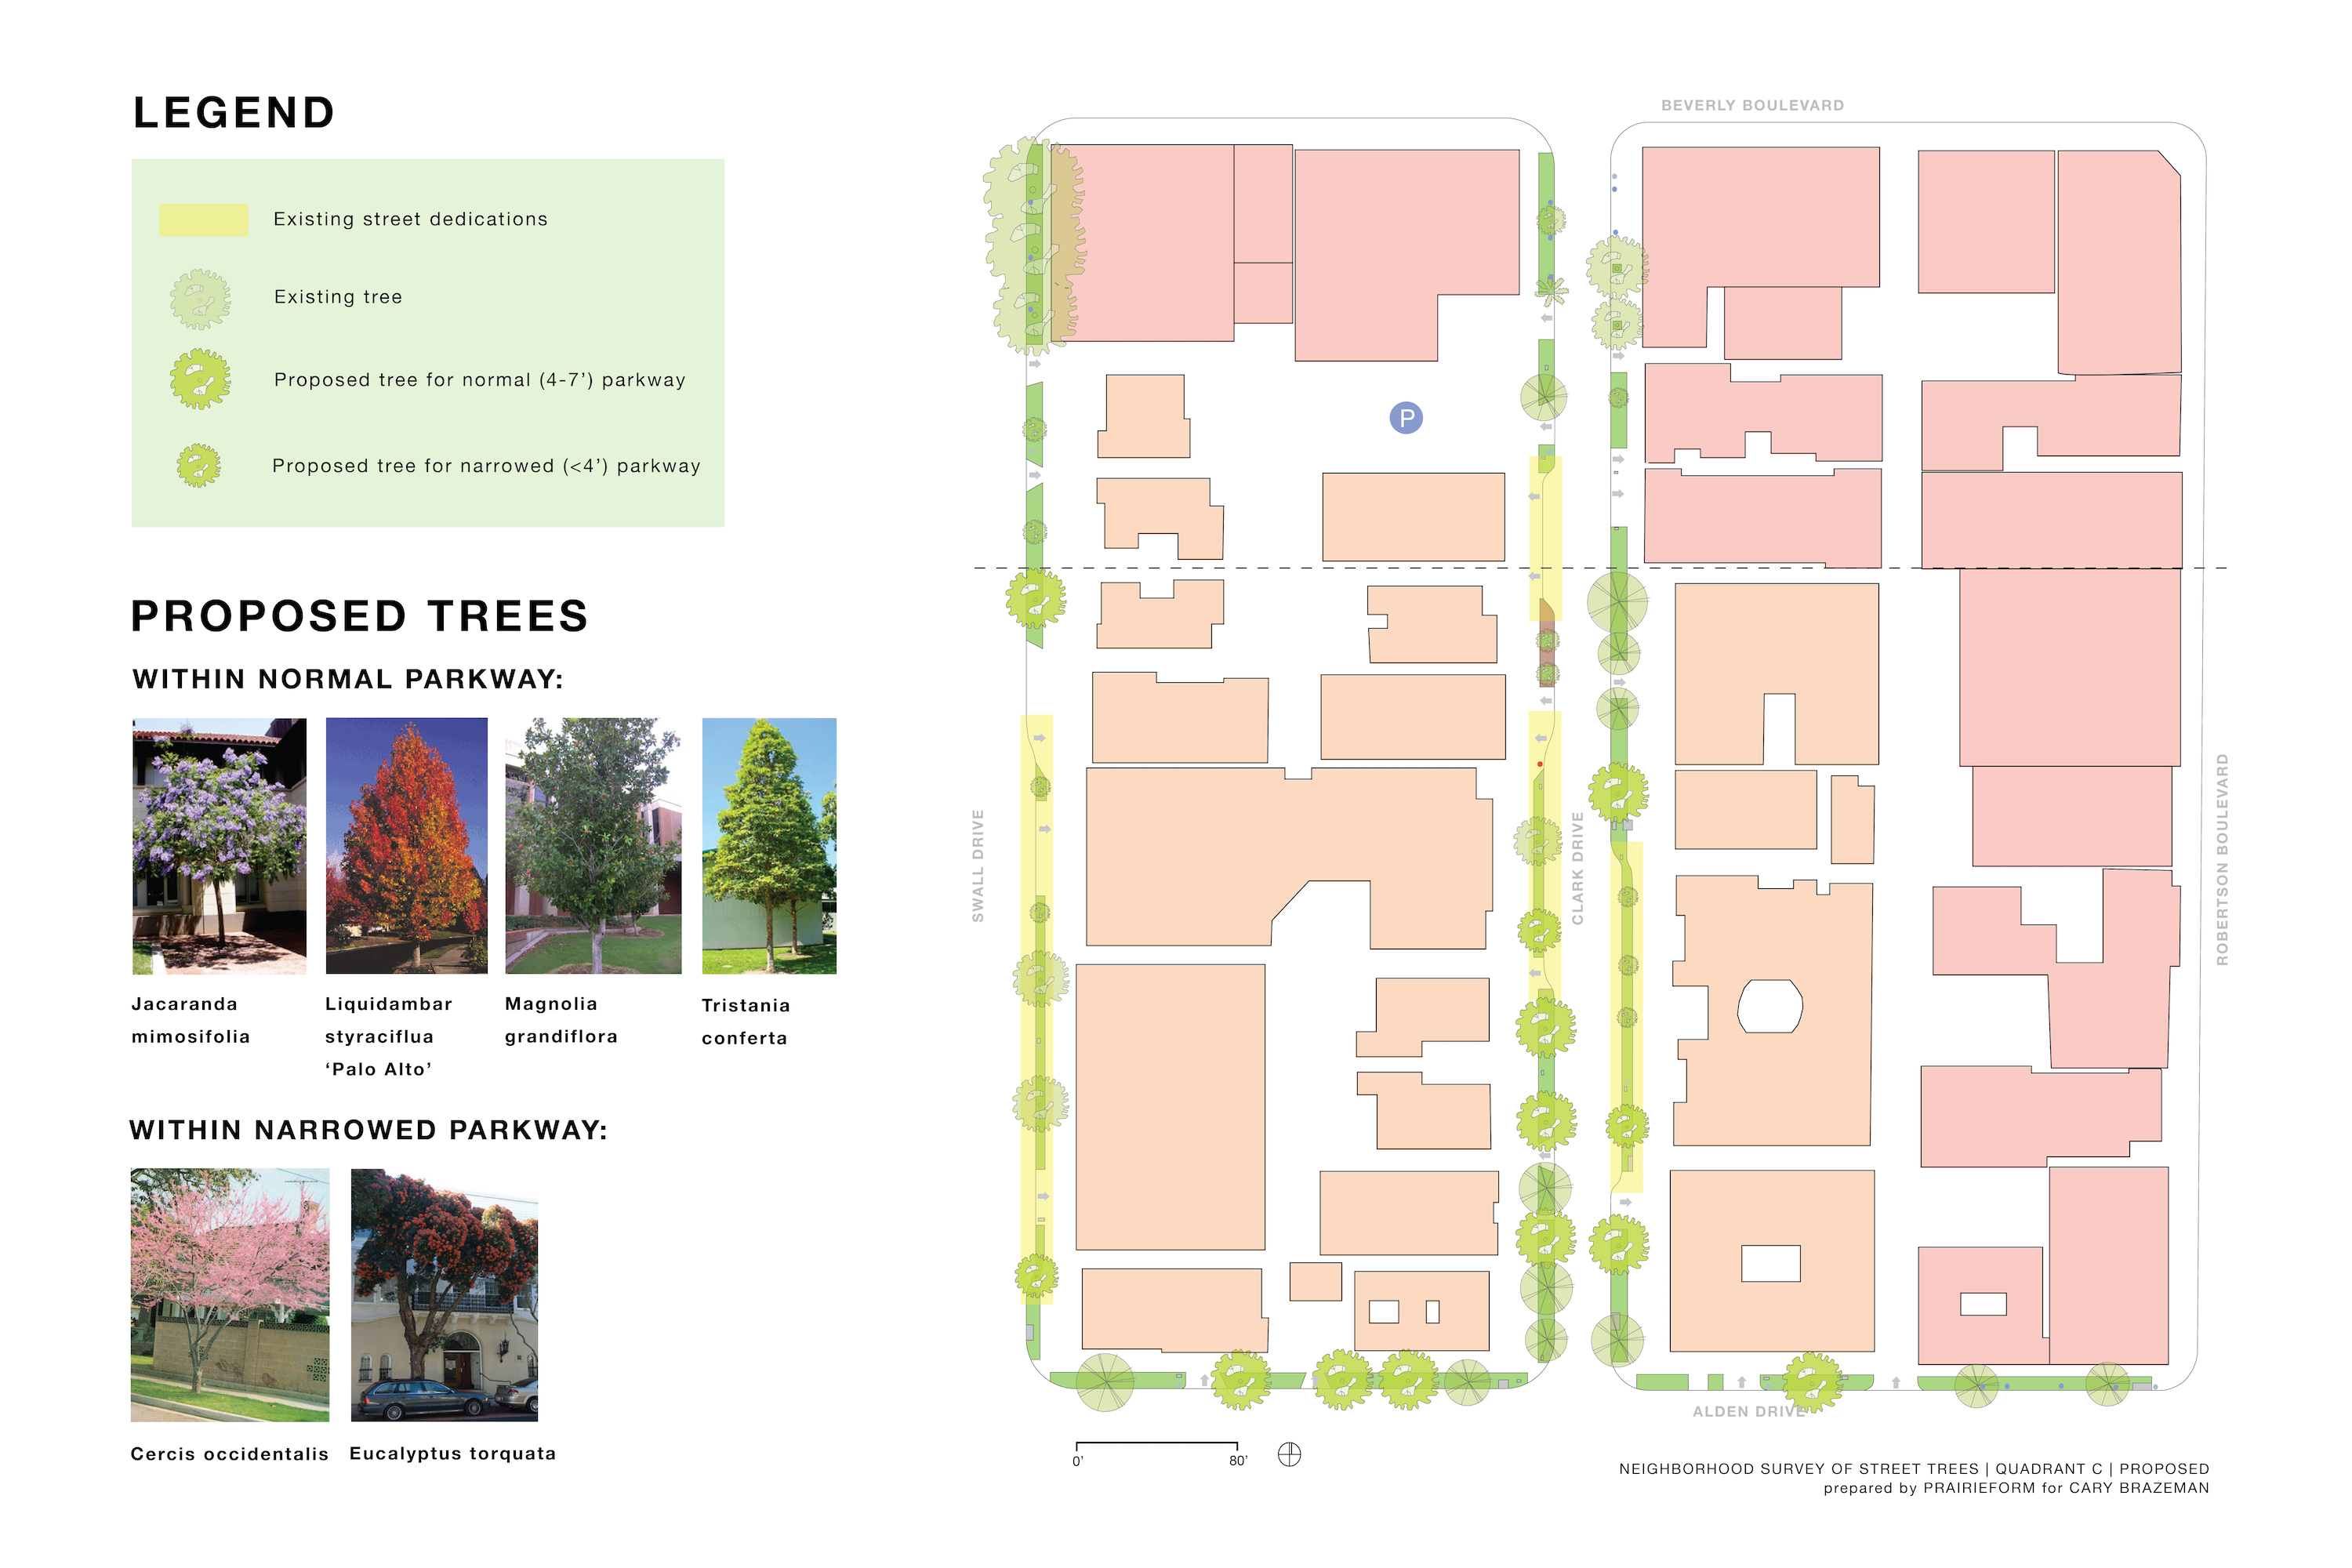 One of the quadrants of the street-tree survey showing where new trees can be planted.